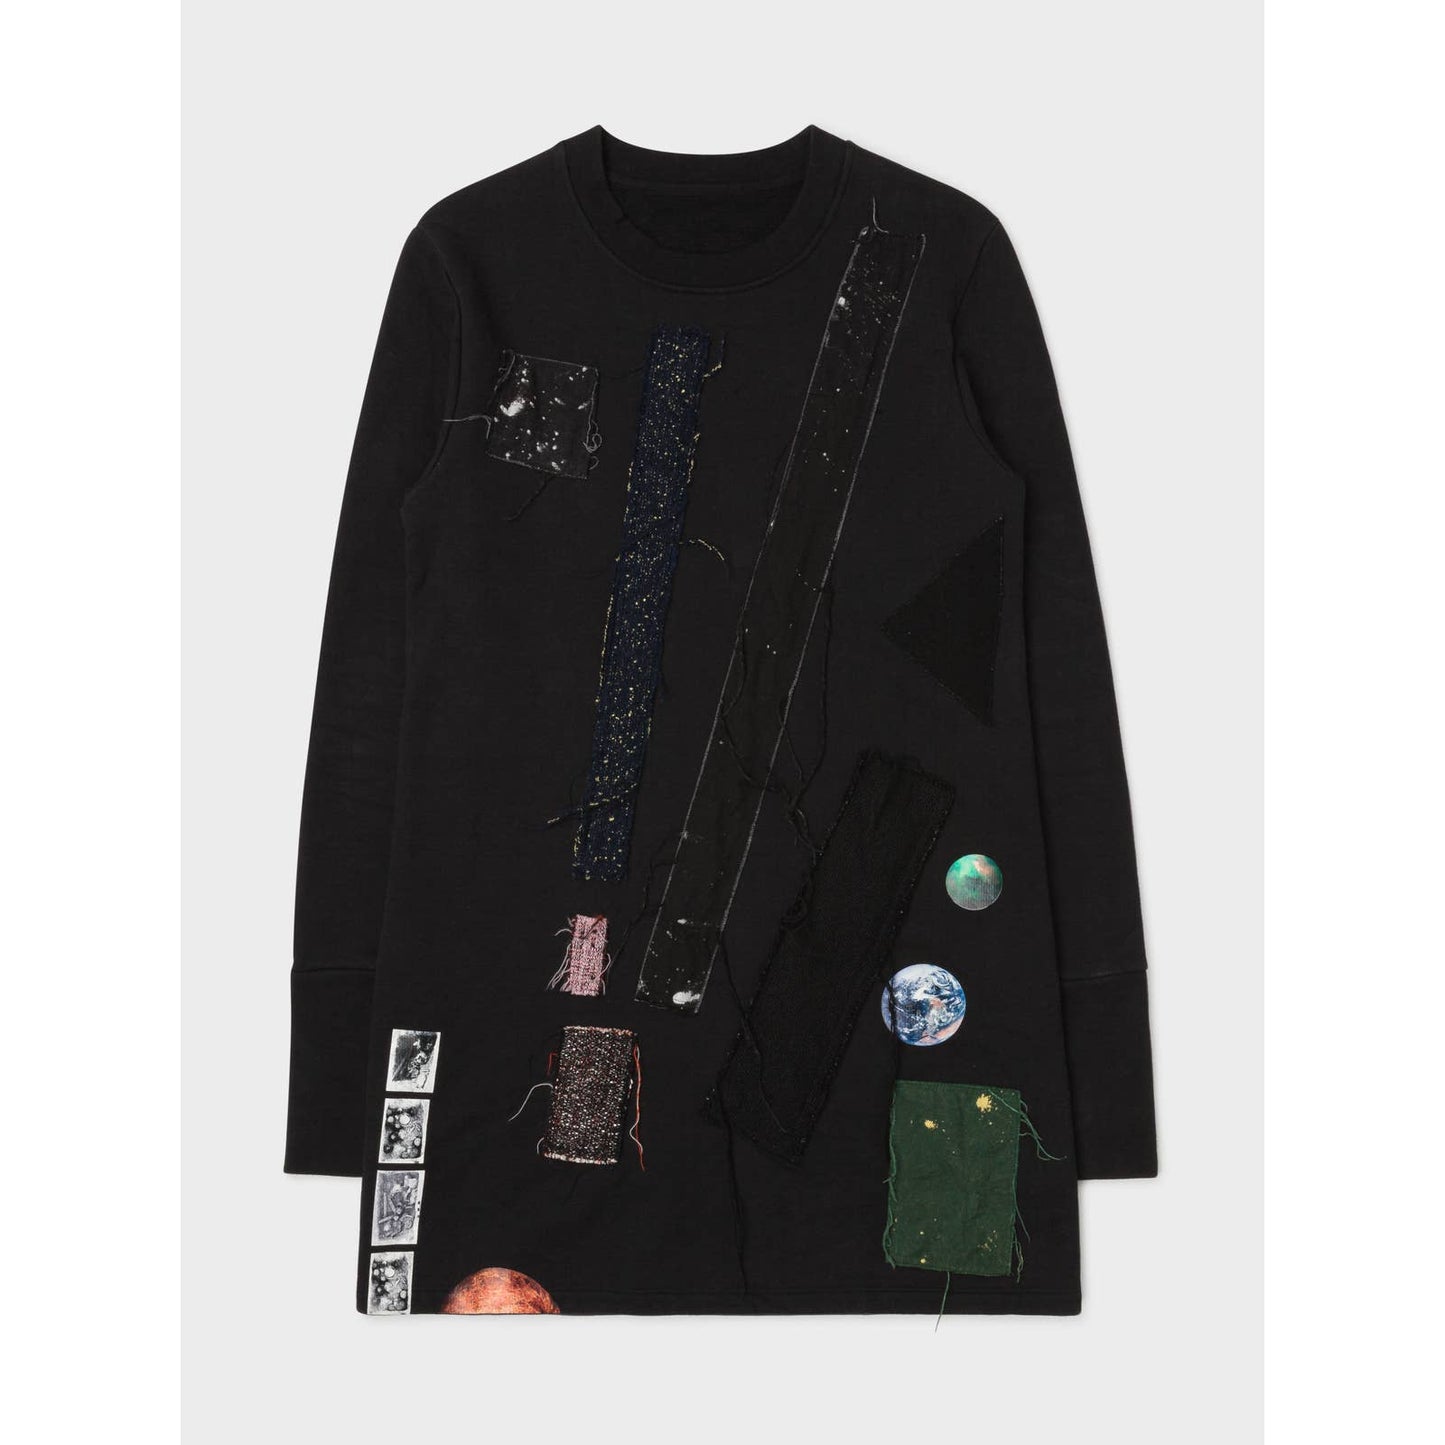 FW15 Patch Sterling Ruby Crewneck - Groupie